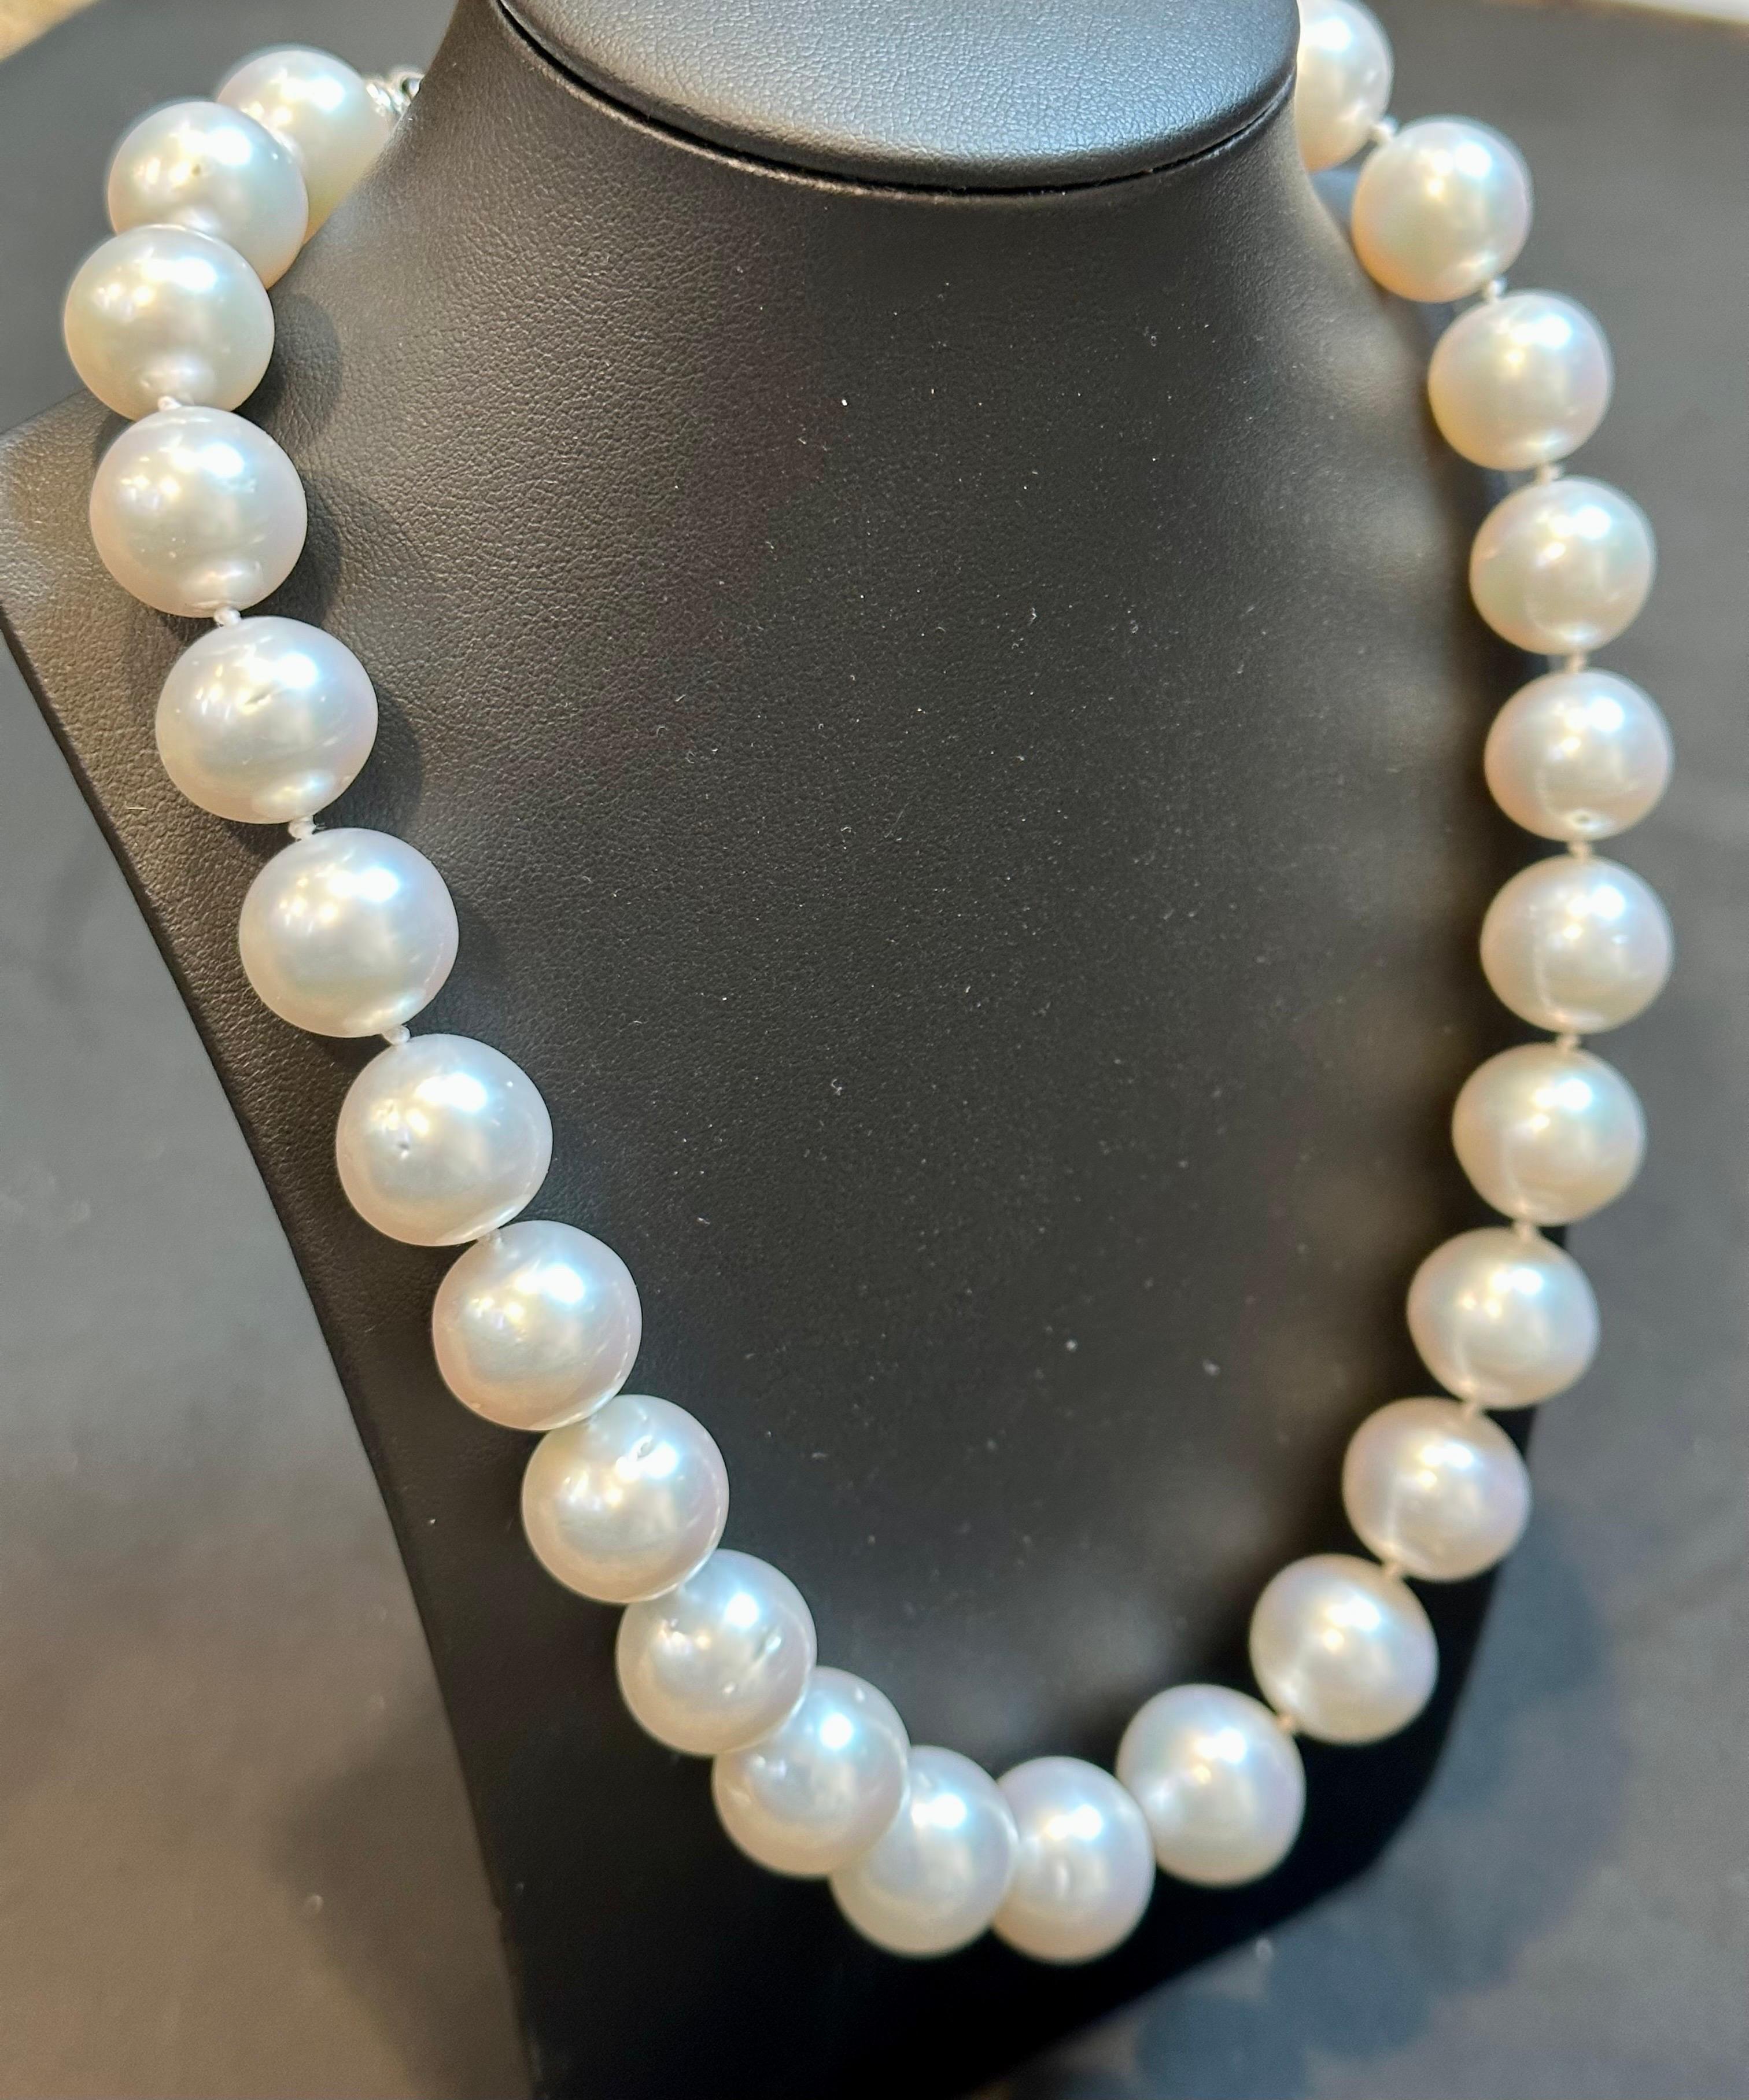 The white South Sea pearl measures between 15 and 17.5 millimeters in diameter. It has a round shape with a smooth and lustrous surface. The pearl has a white color with a hint of silver overtone, which adds to its elegant and sophisticated